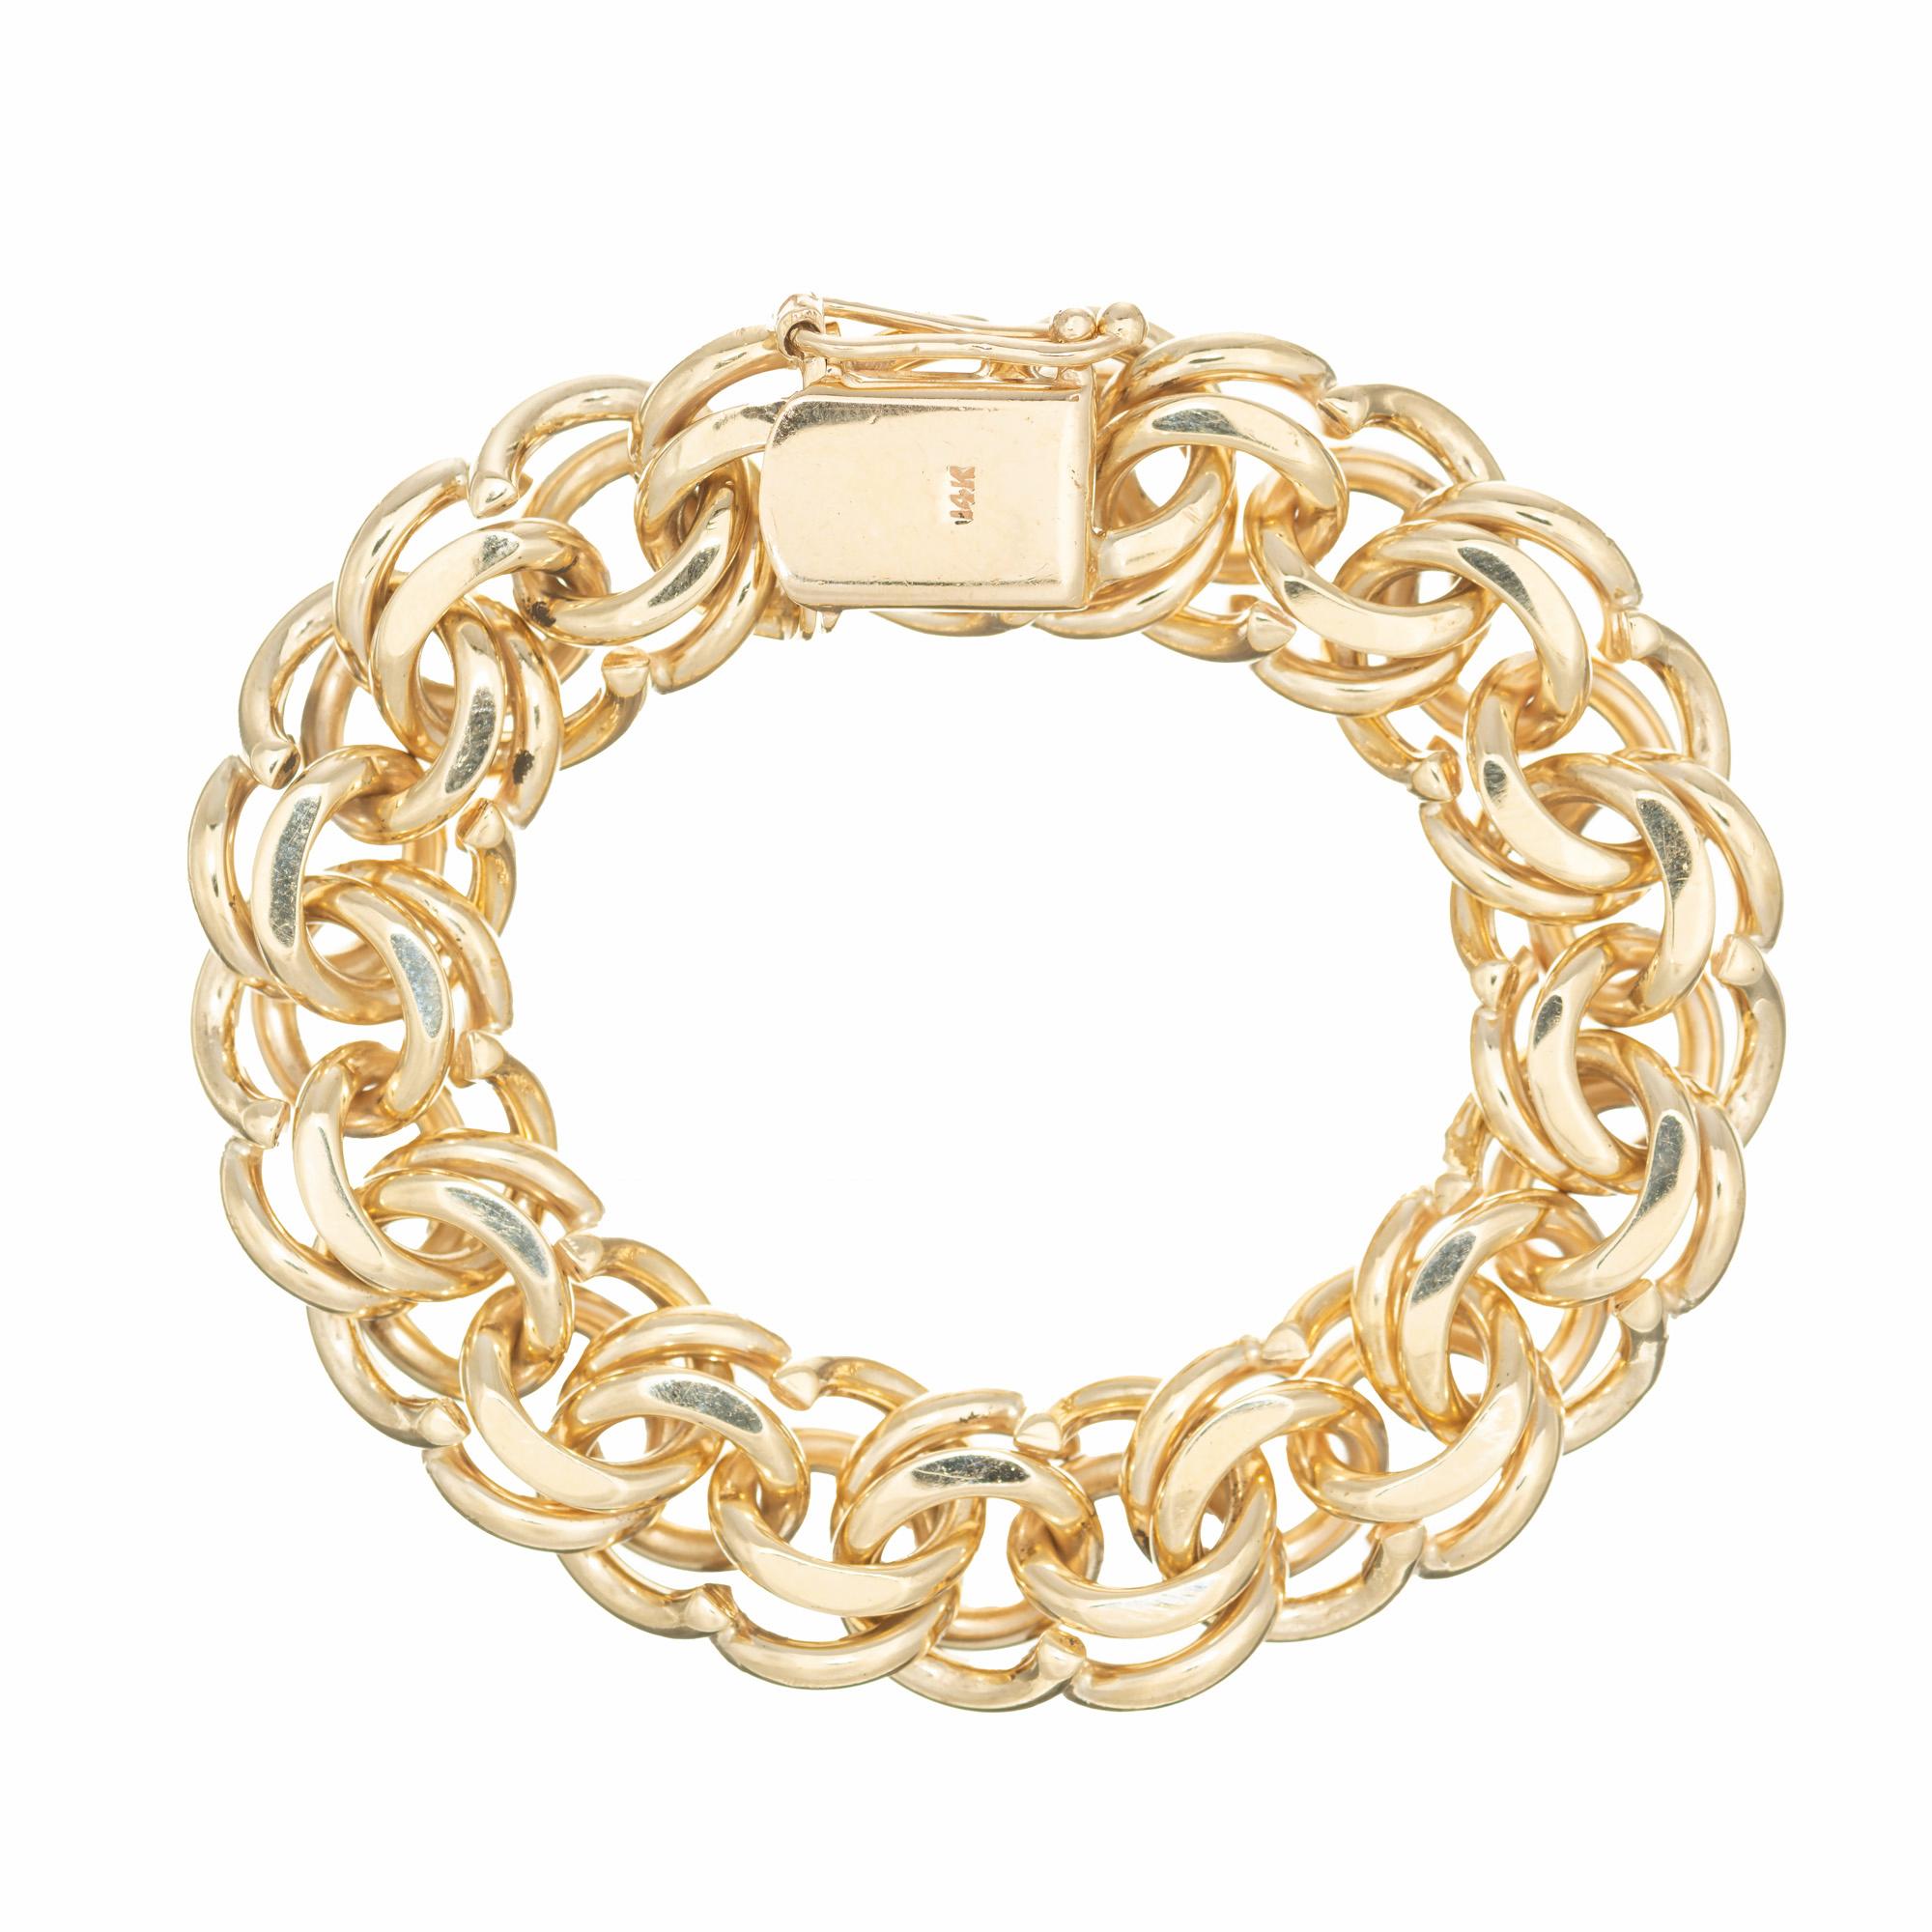 Vintage 1950's extra heavy solid double link charm bracelet with secure catch and safety. 8 inches long. 

14k yellow gold 
Stamped: 14k
88.7 grams
Total length: 8 Inches
Width: 16mm
Thickness/depth: 7.8mm

